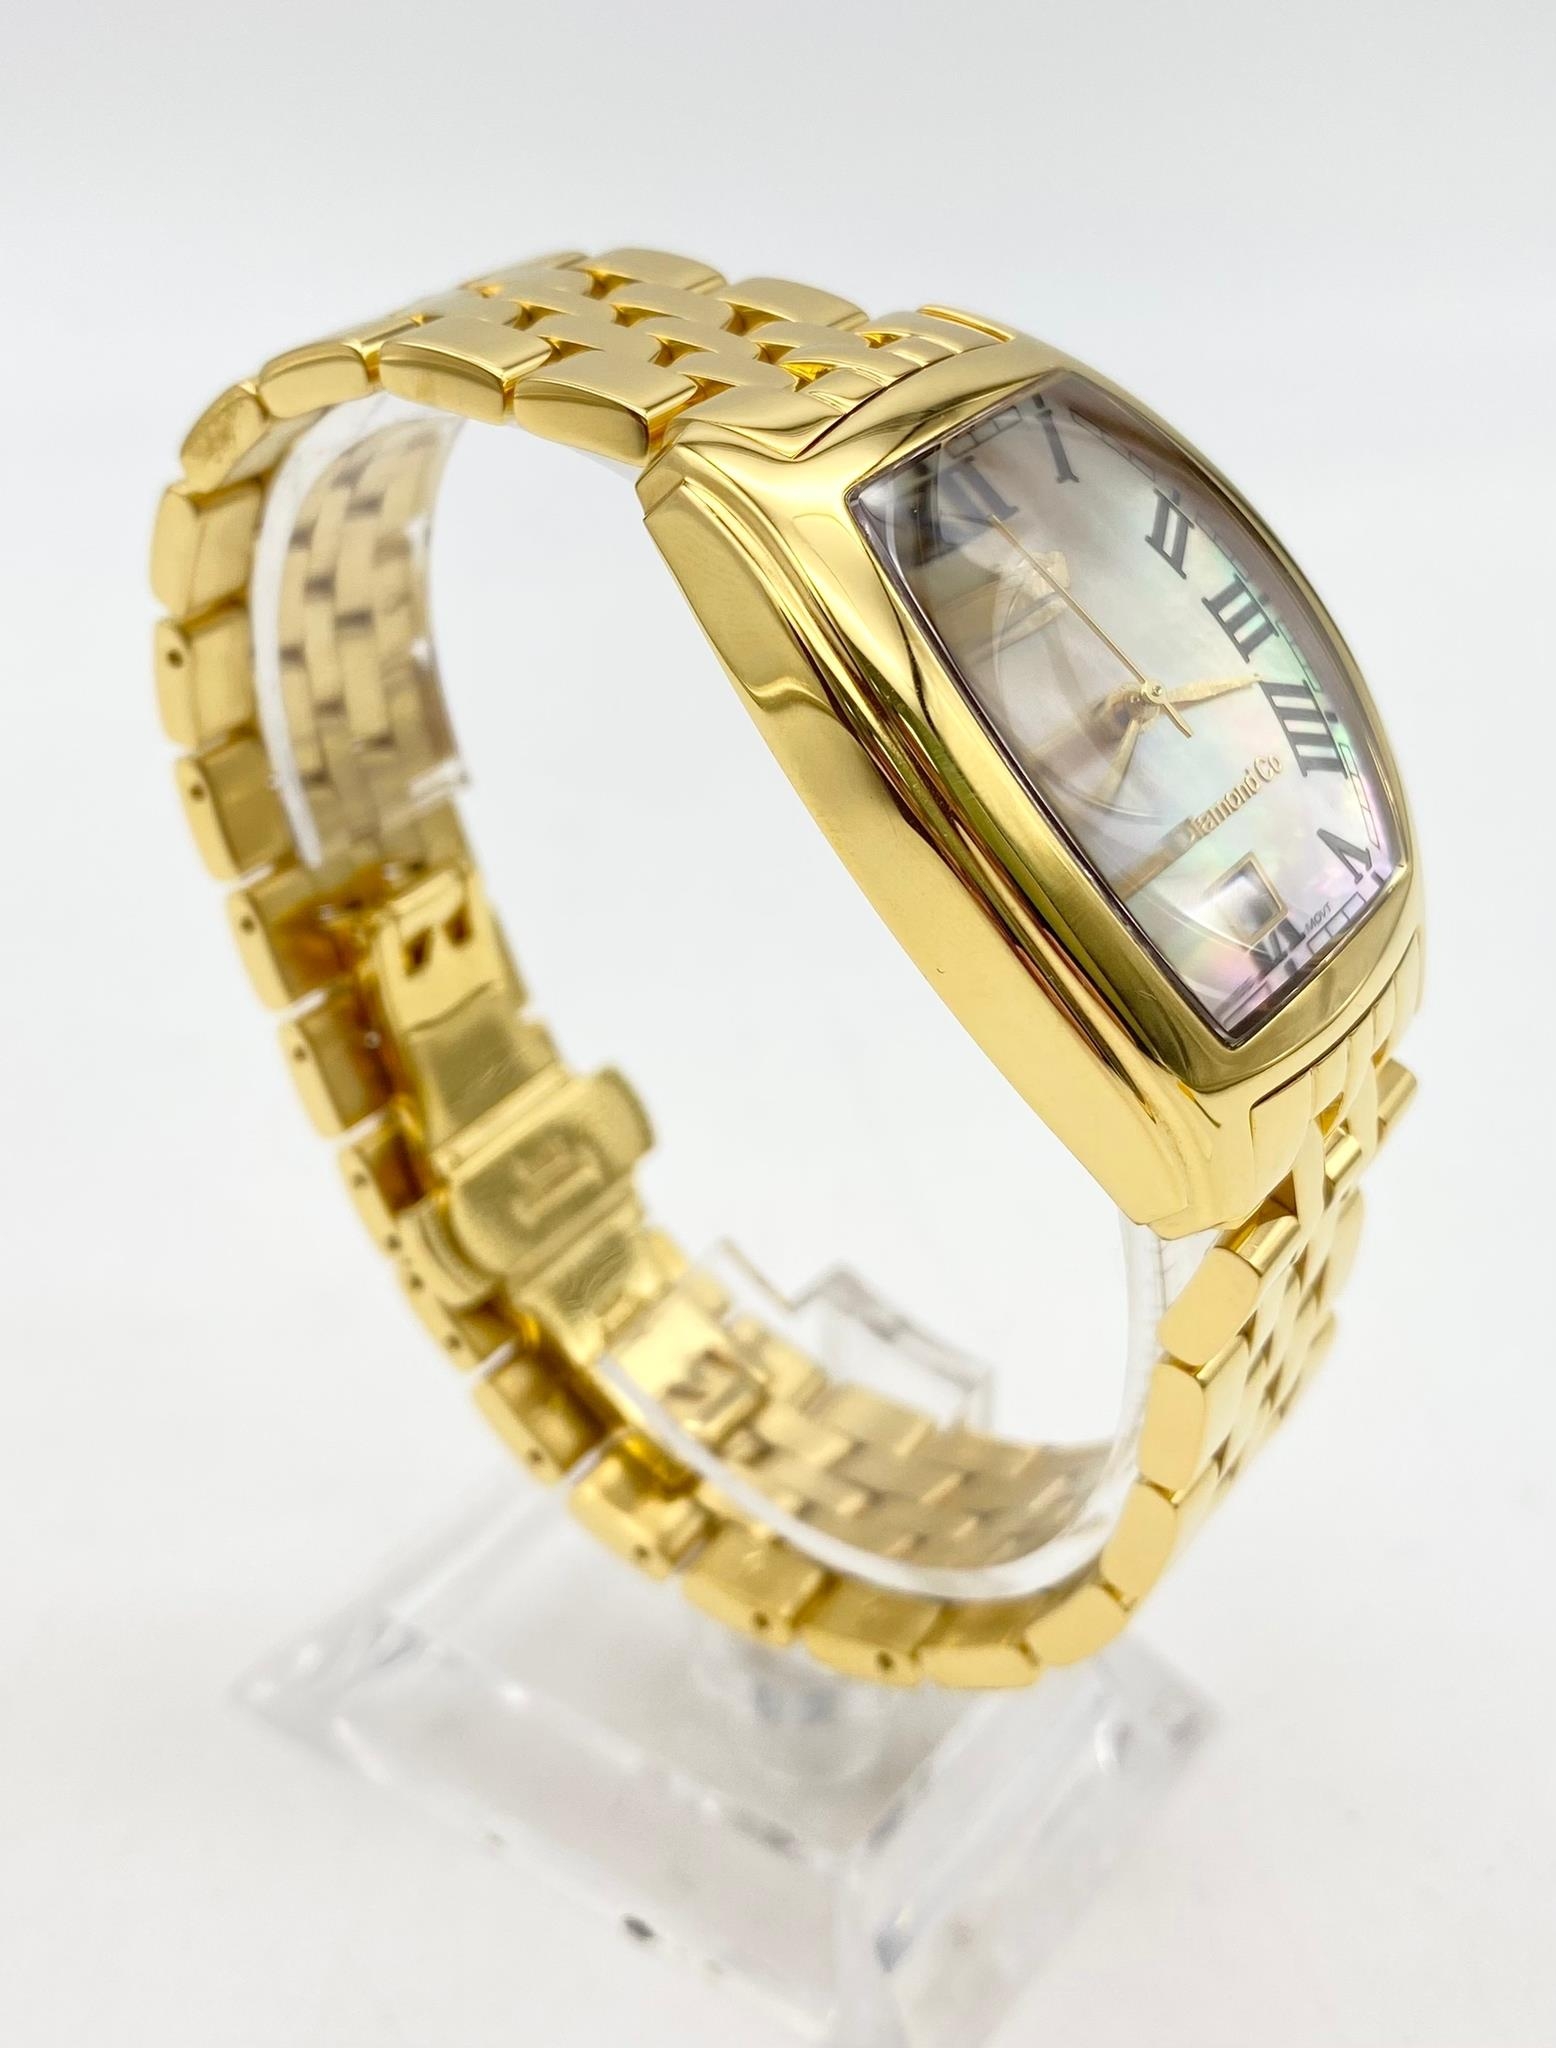 Excellent Condition Limited Edition London Diamond Company 18 Carat Gold Plated, Pearl Faced, Men’ - Image 2 of 4